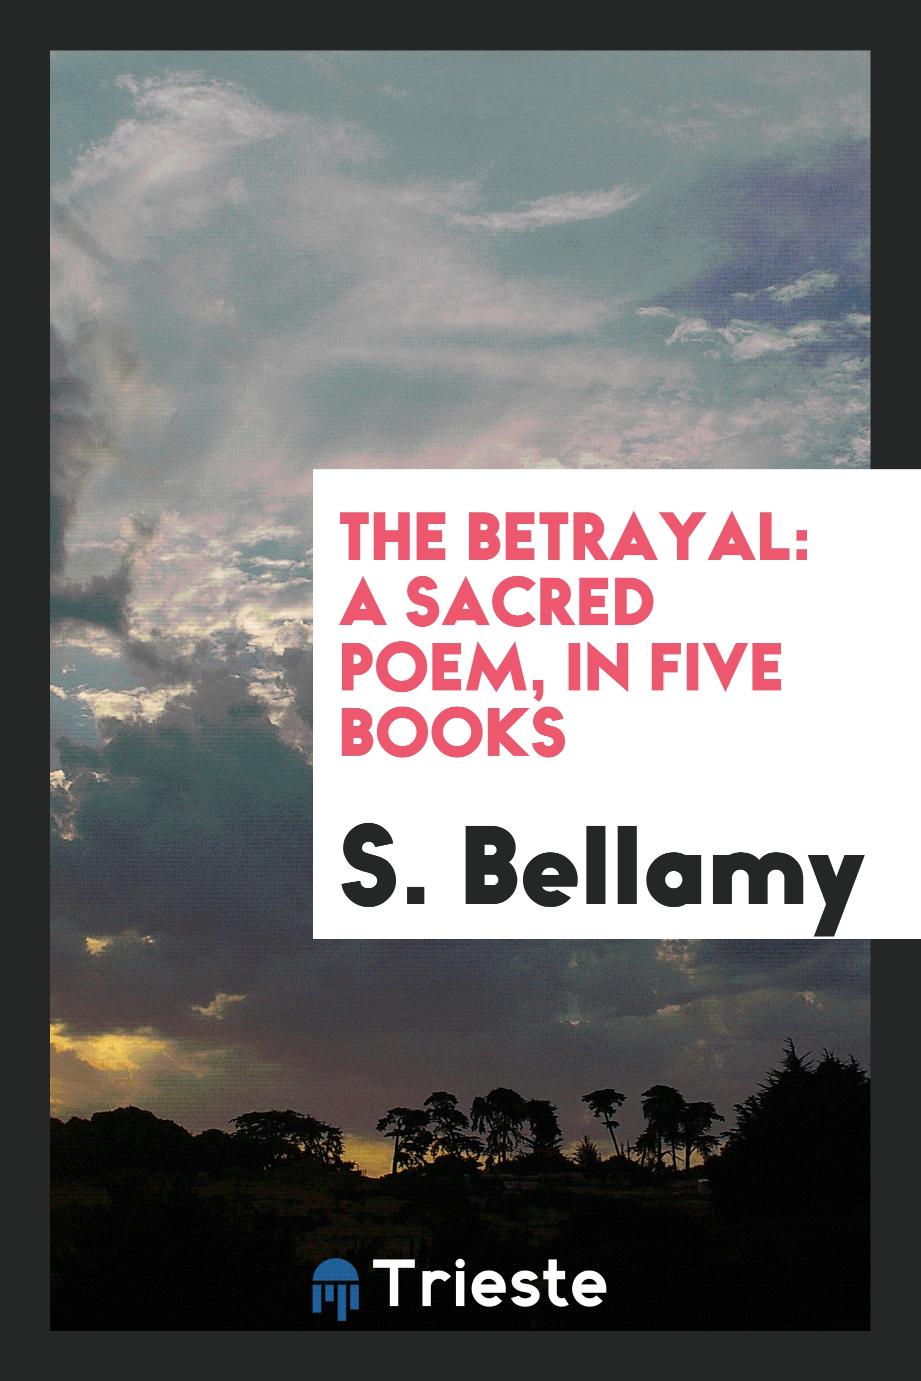 The Betrayal: A Sacred Poem, in Five Books